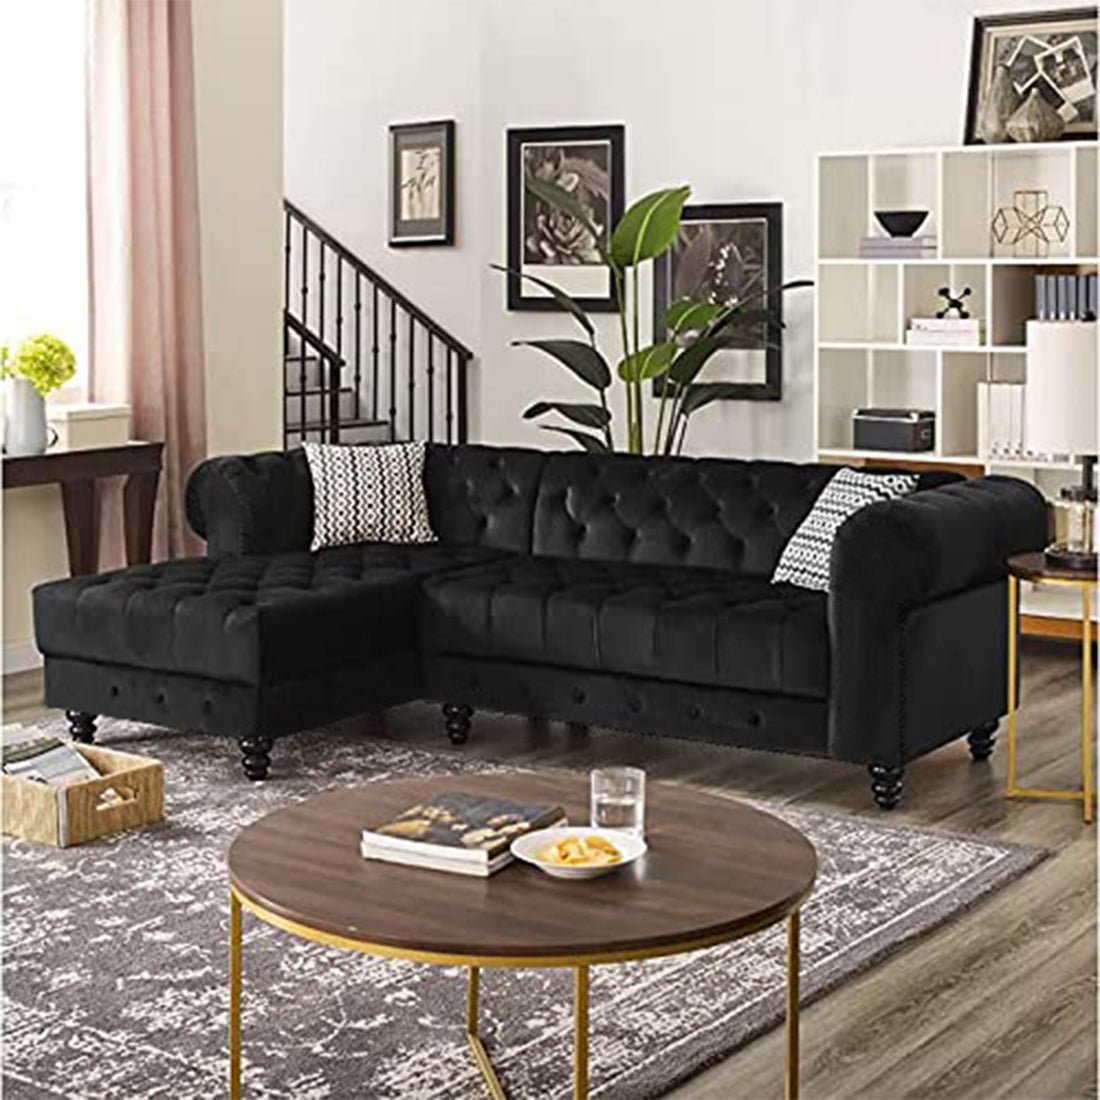 Torque India Cannes Solid Wood 5 Seater L Shape Fabric Chesterfield Sofa for Living - Black - Torque India